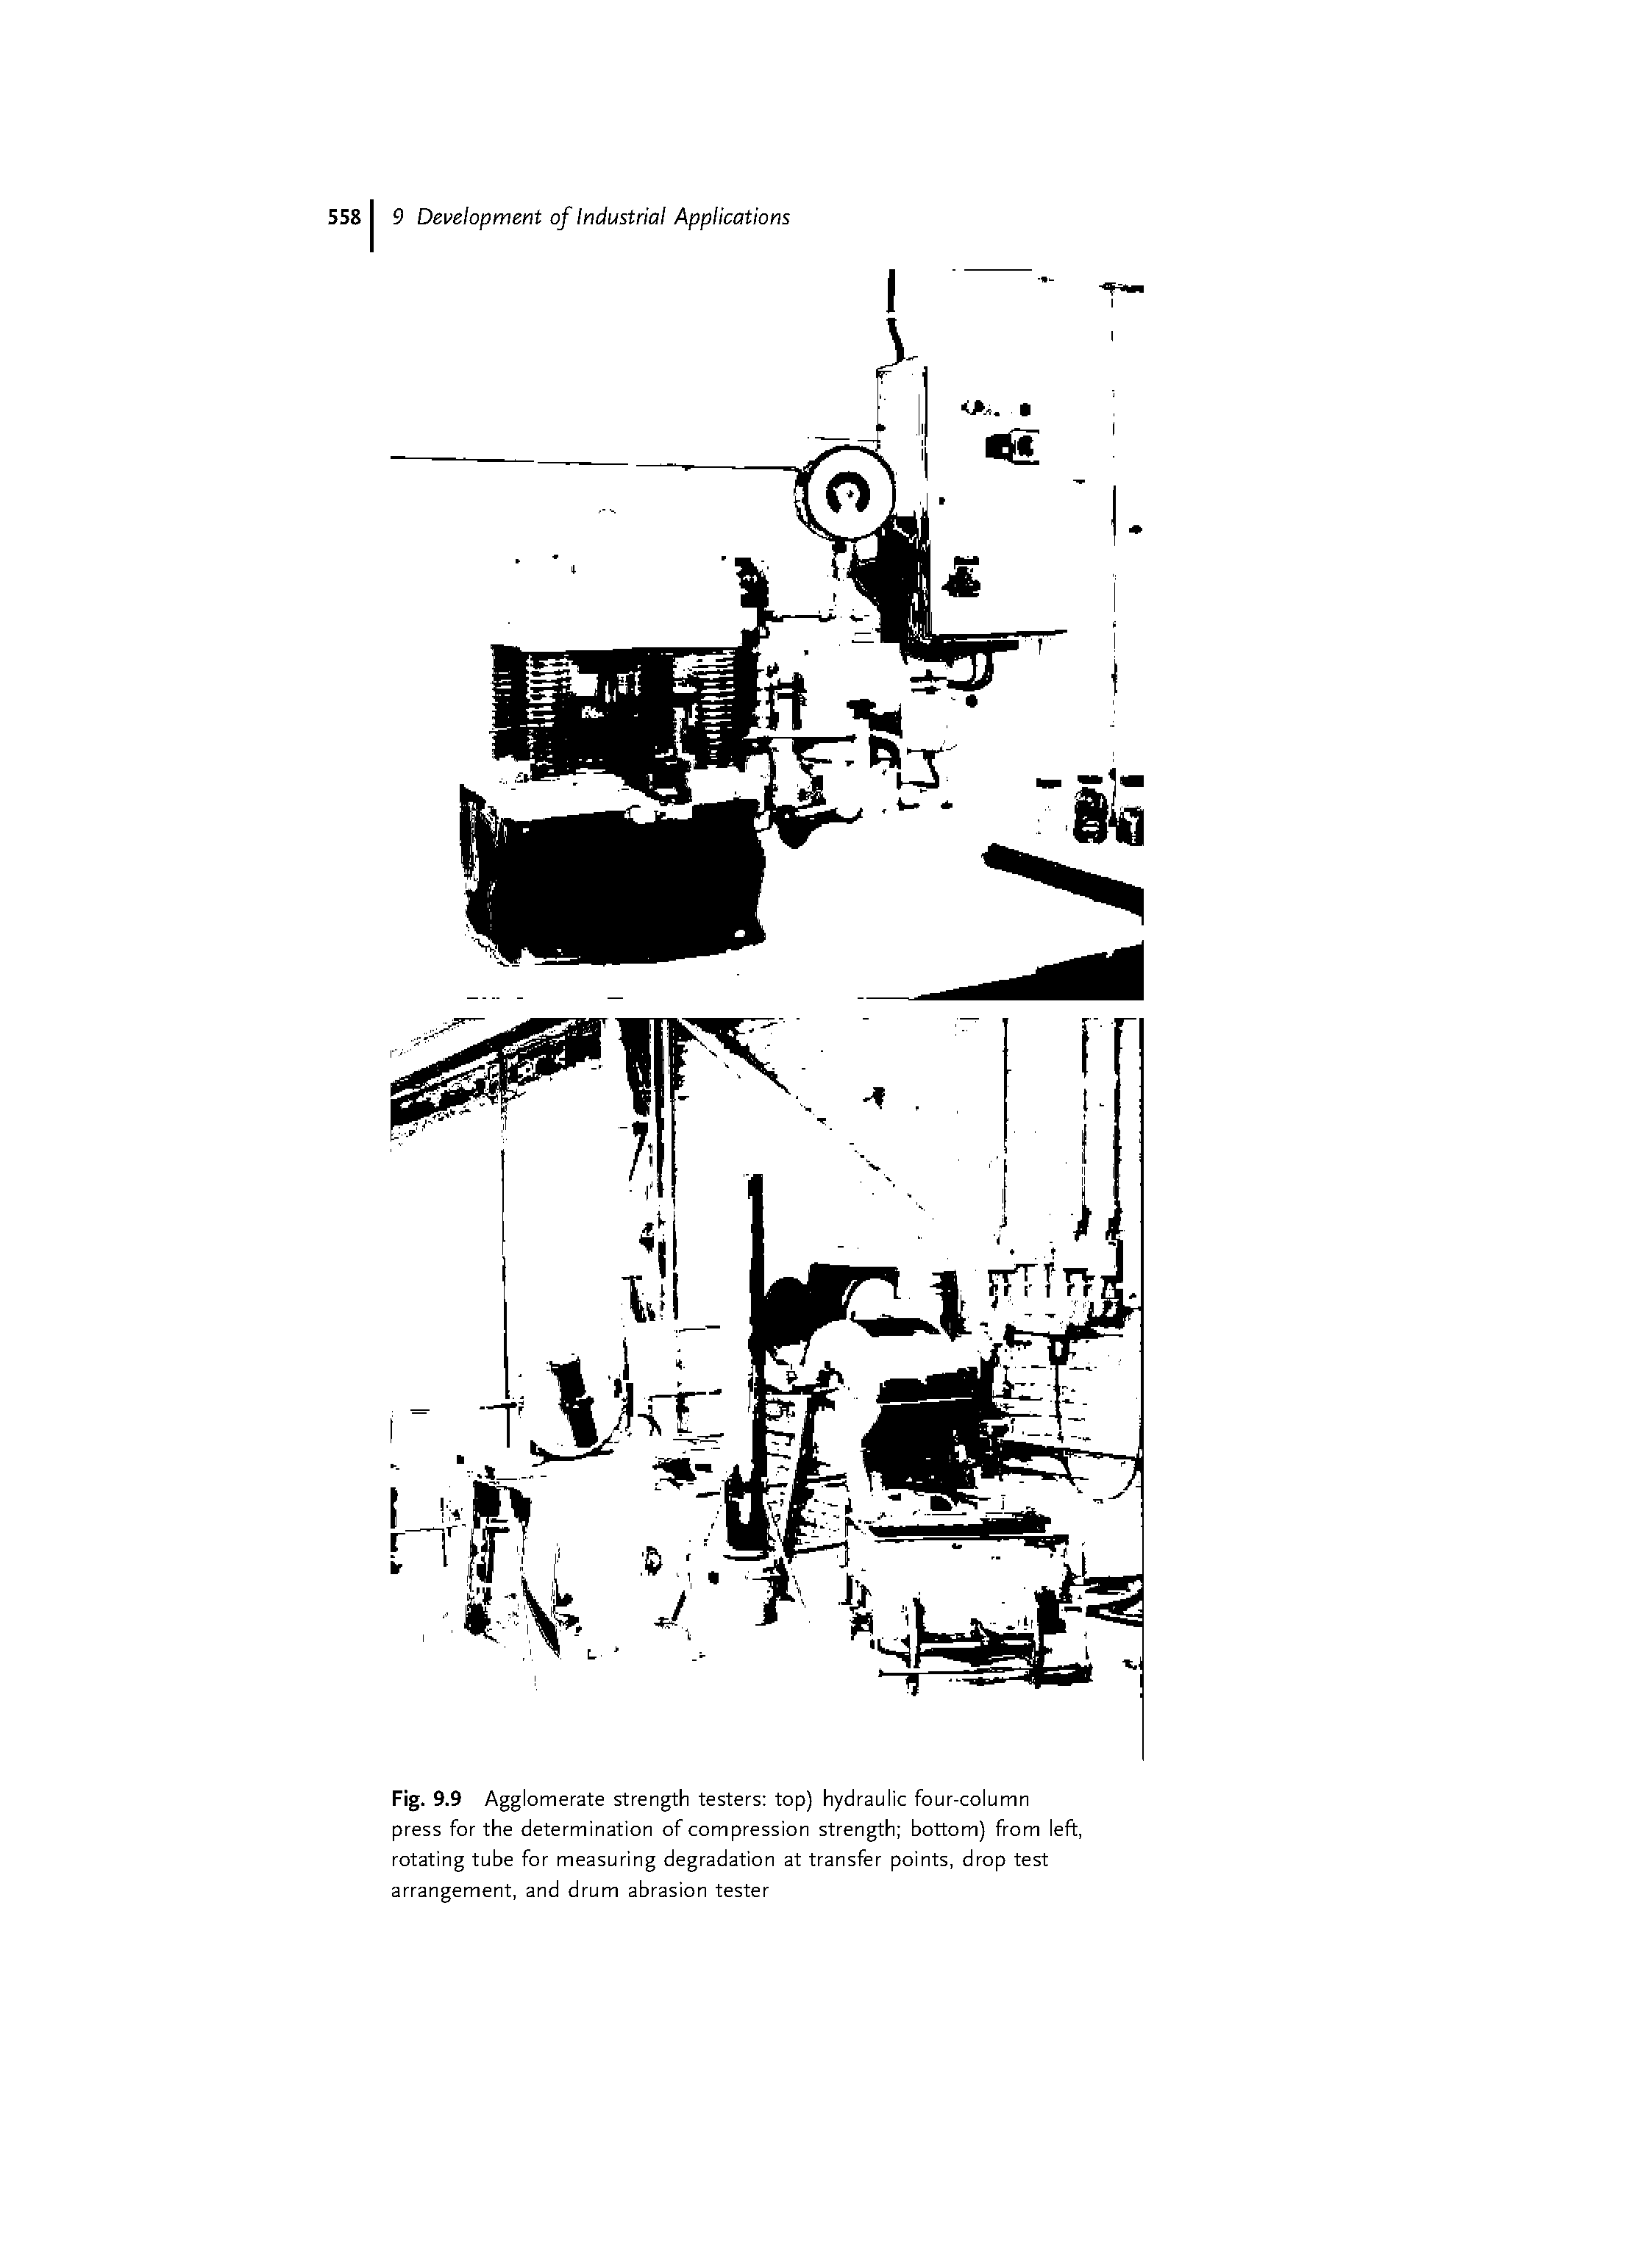 Fig. 9.9 Agglomerate strength testers top) hydraulic four-column press for the determination of compression strength bottom) from left, rotating tube for measuring degradation at transfer points, drop test arrangement, and drum abrasion tester...